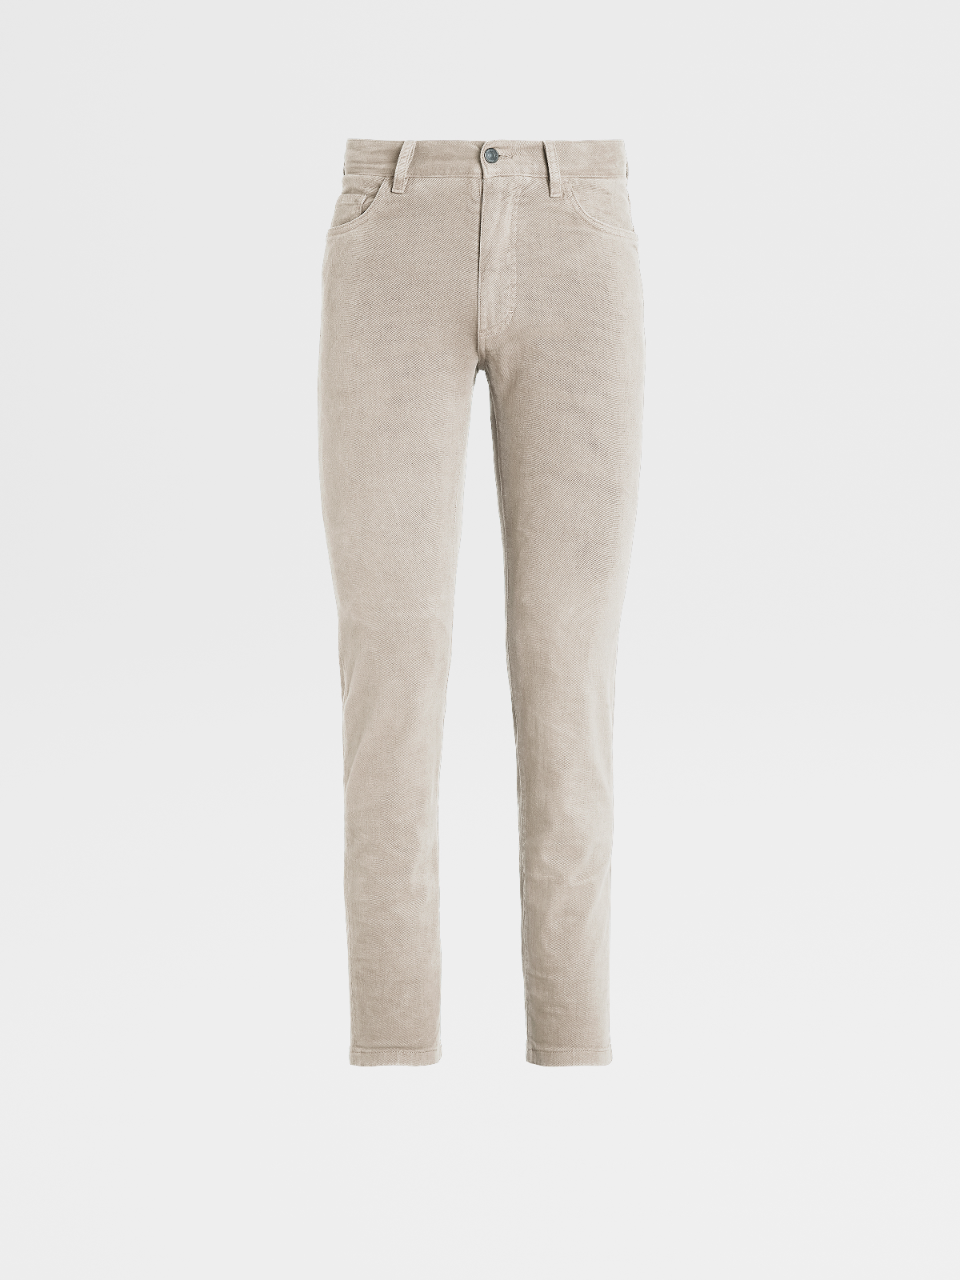 White Cotton and Lyocell 5-Pocket Jeans